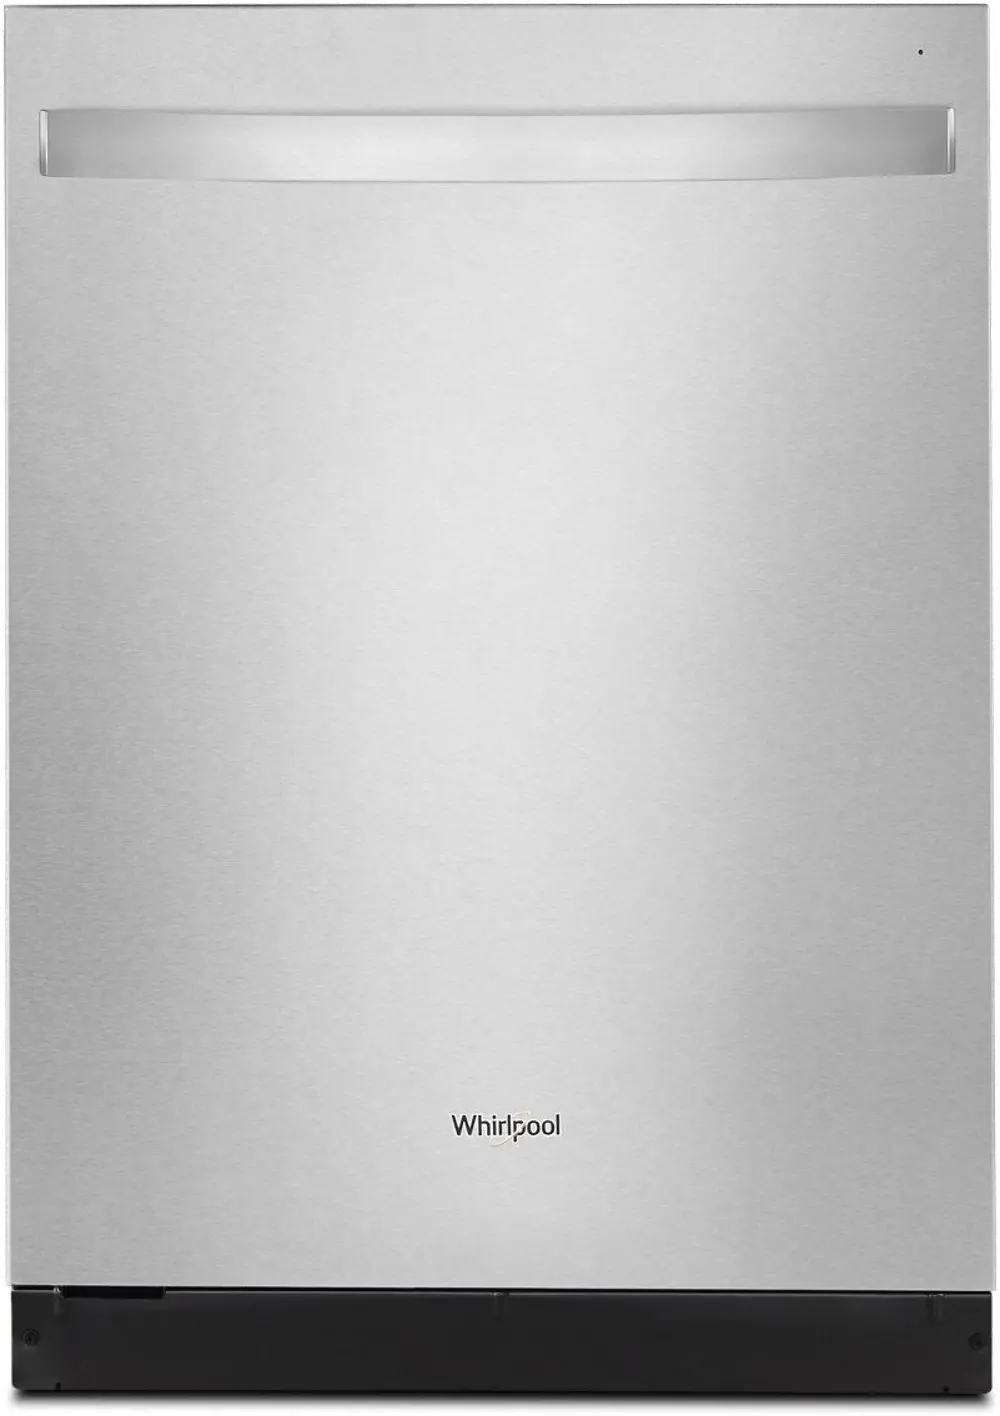 WDT730HAMZ Whirlpool Top Control Dishwasher - Stainless Steel-1